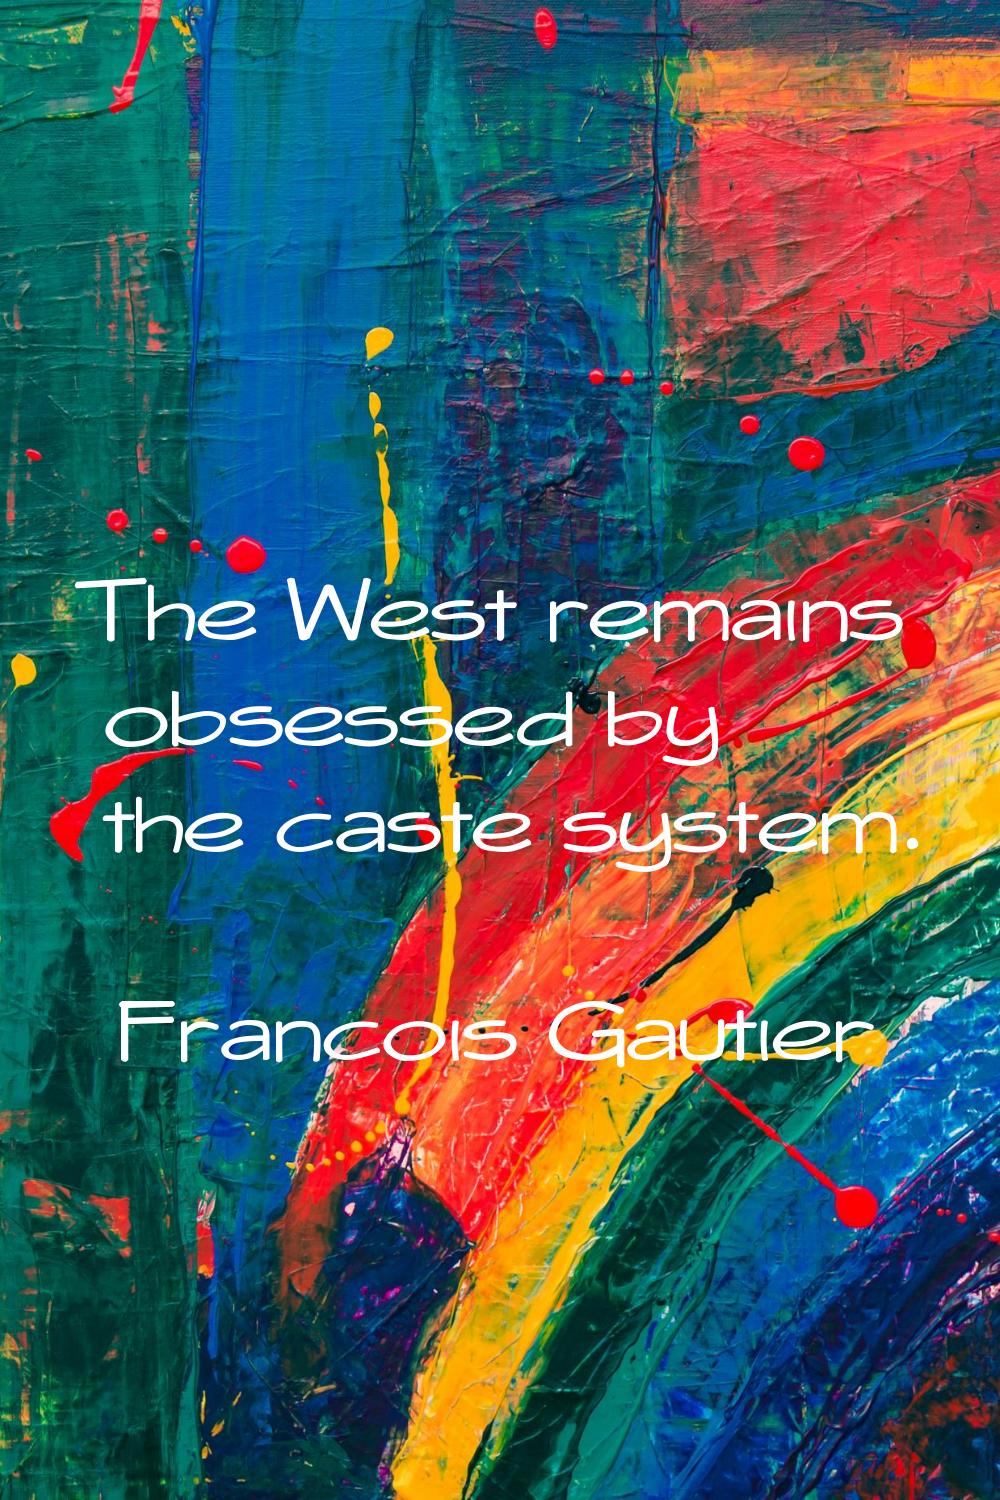 The West remains obsessed by the caste system.